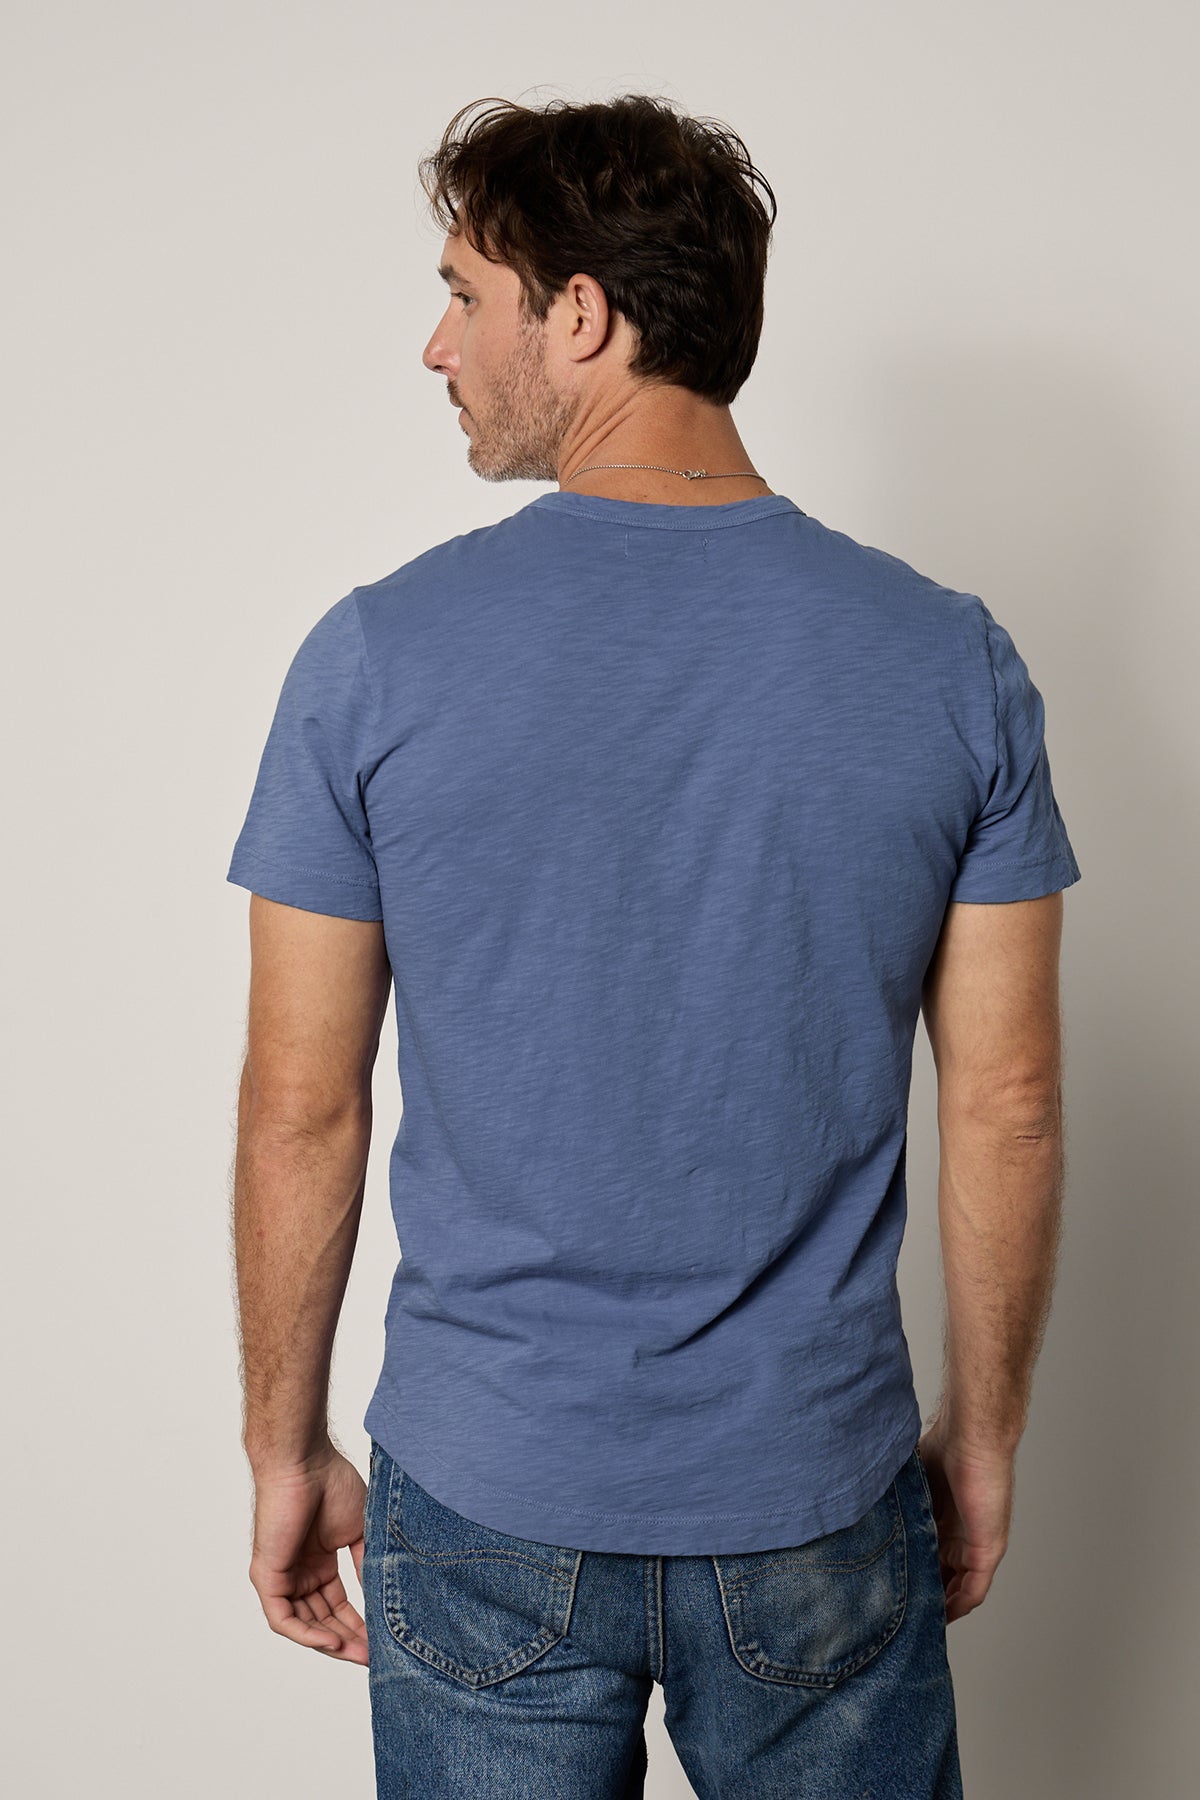   The back view of a man wearing a Velvet by Graham & Spencer AMARO CREW NECK SLUB TEE. 